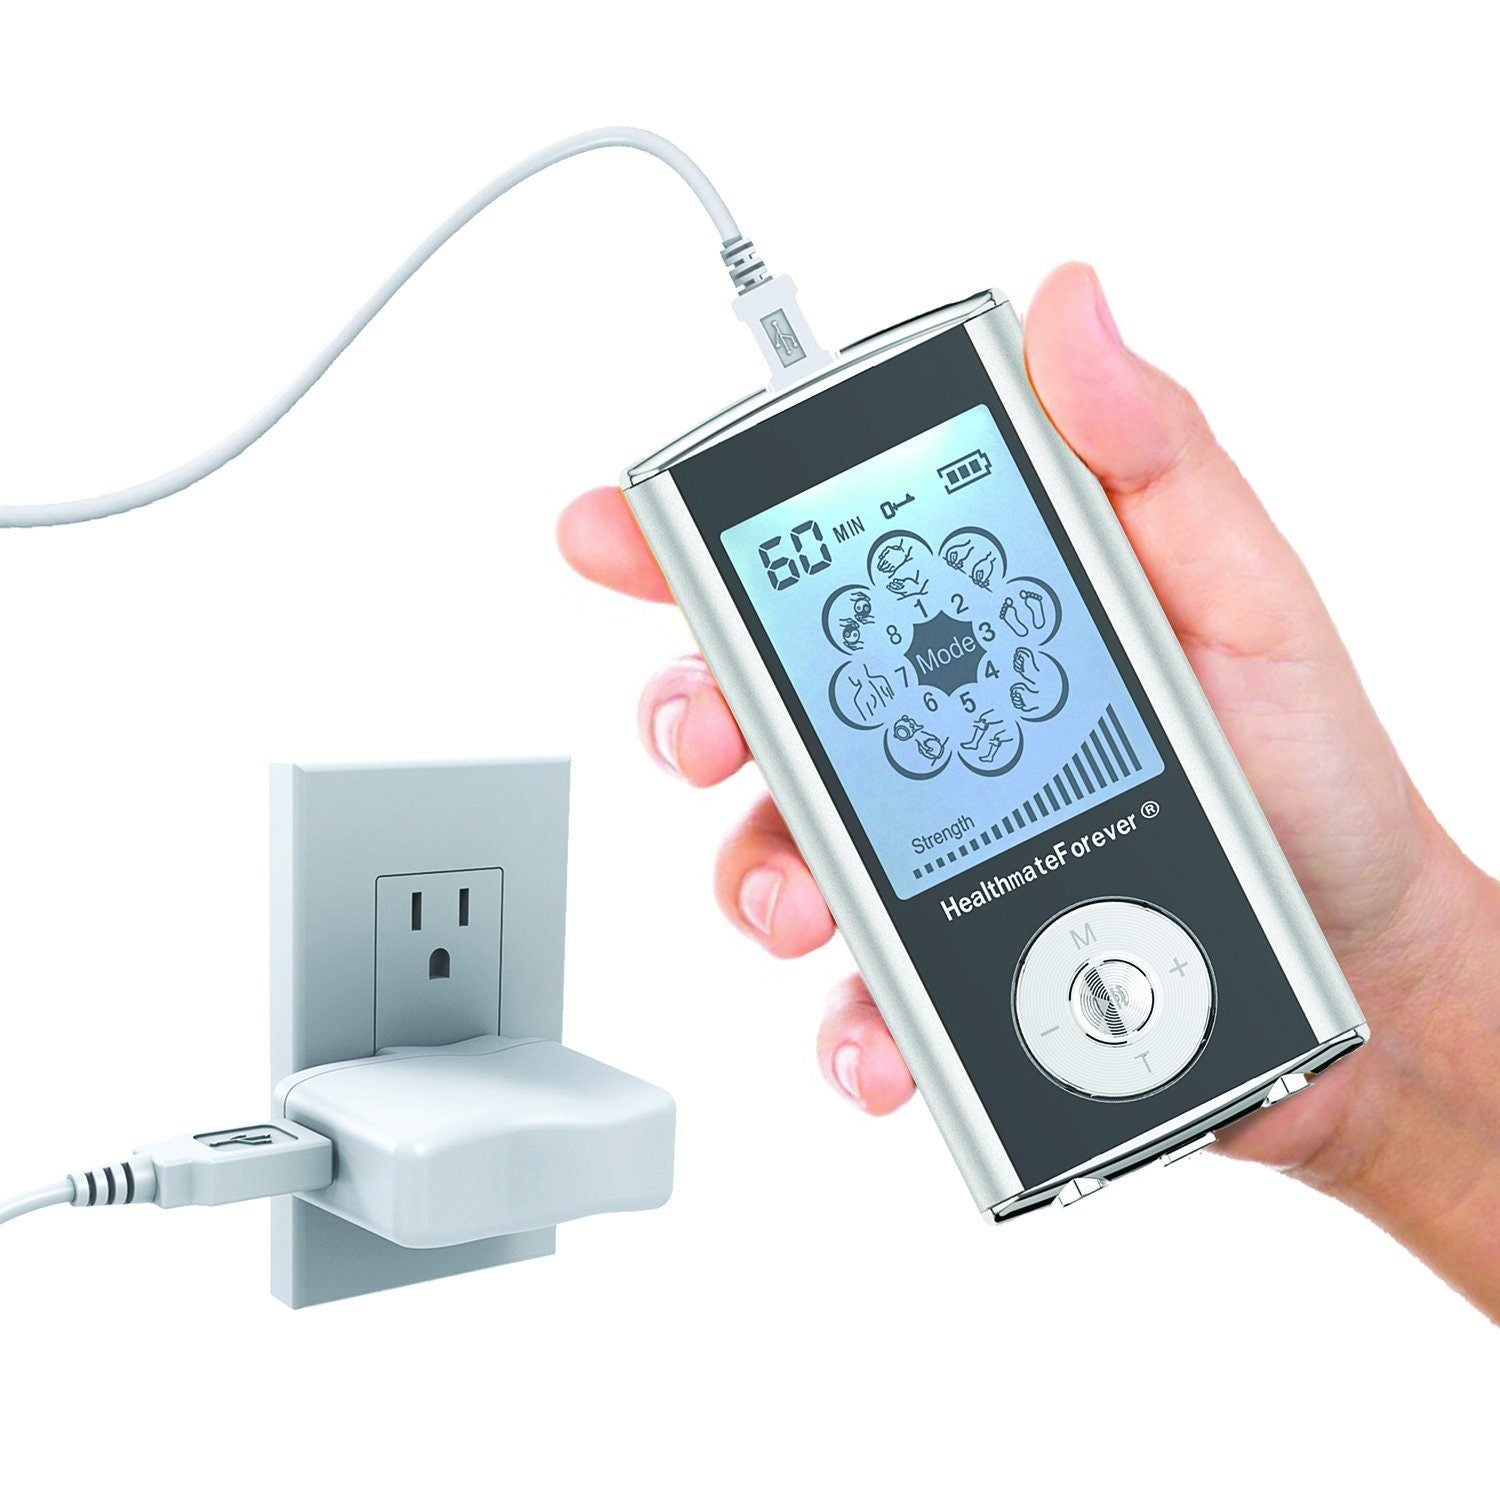 Digital 4-channel EMS/TENS unit, portable/battery or AC adapter